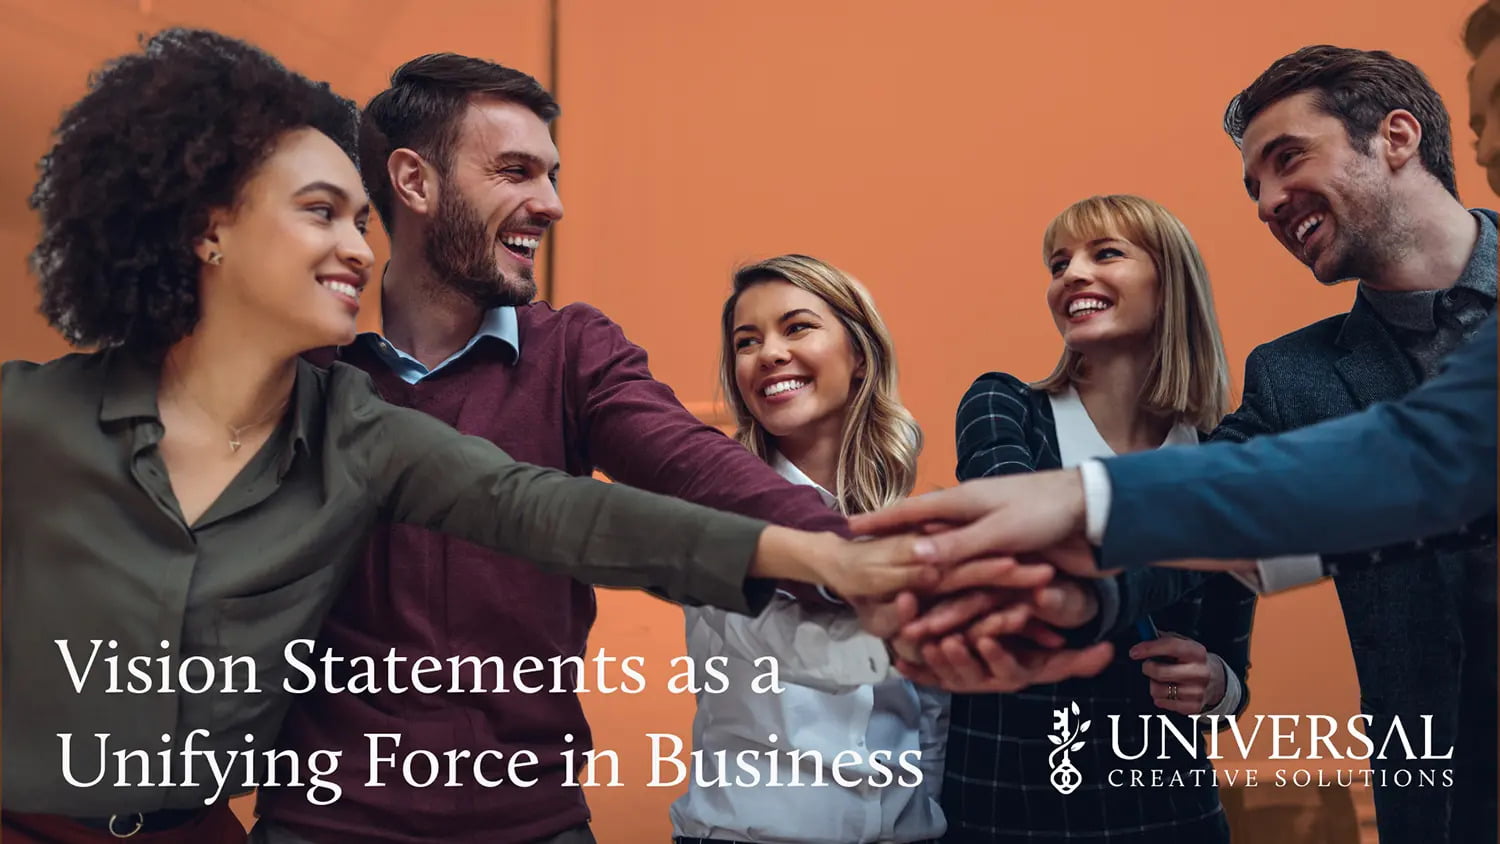 Vision Statements as a Unifying Force in Business